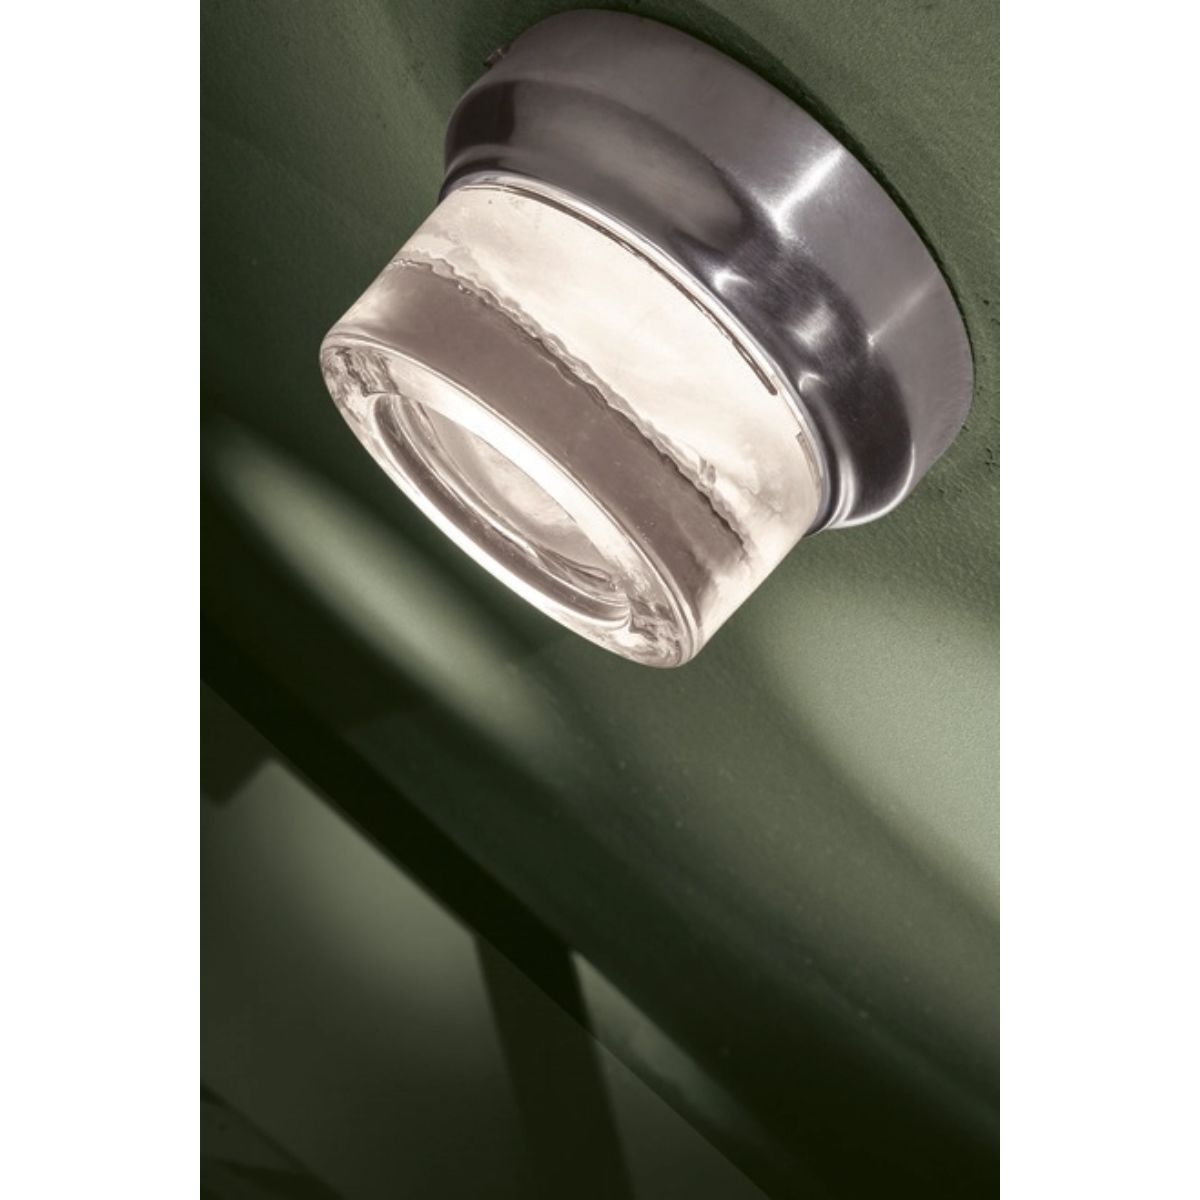 Comet 5 in. LED Outdoor Wall Sconce